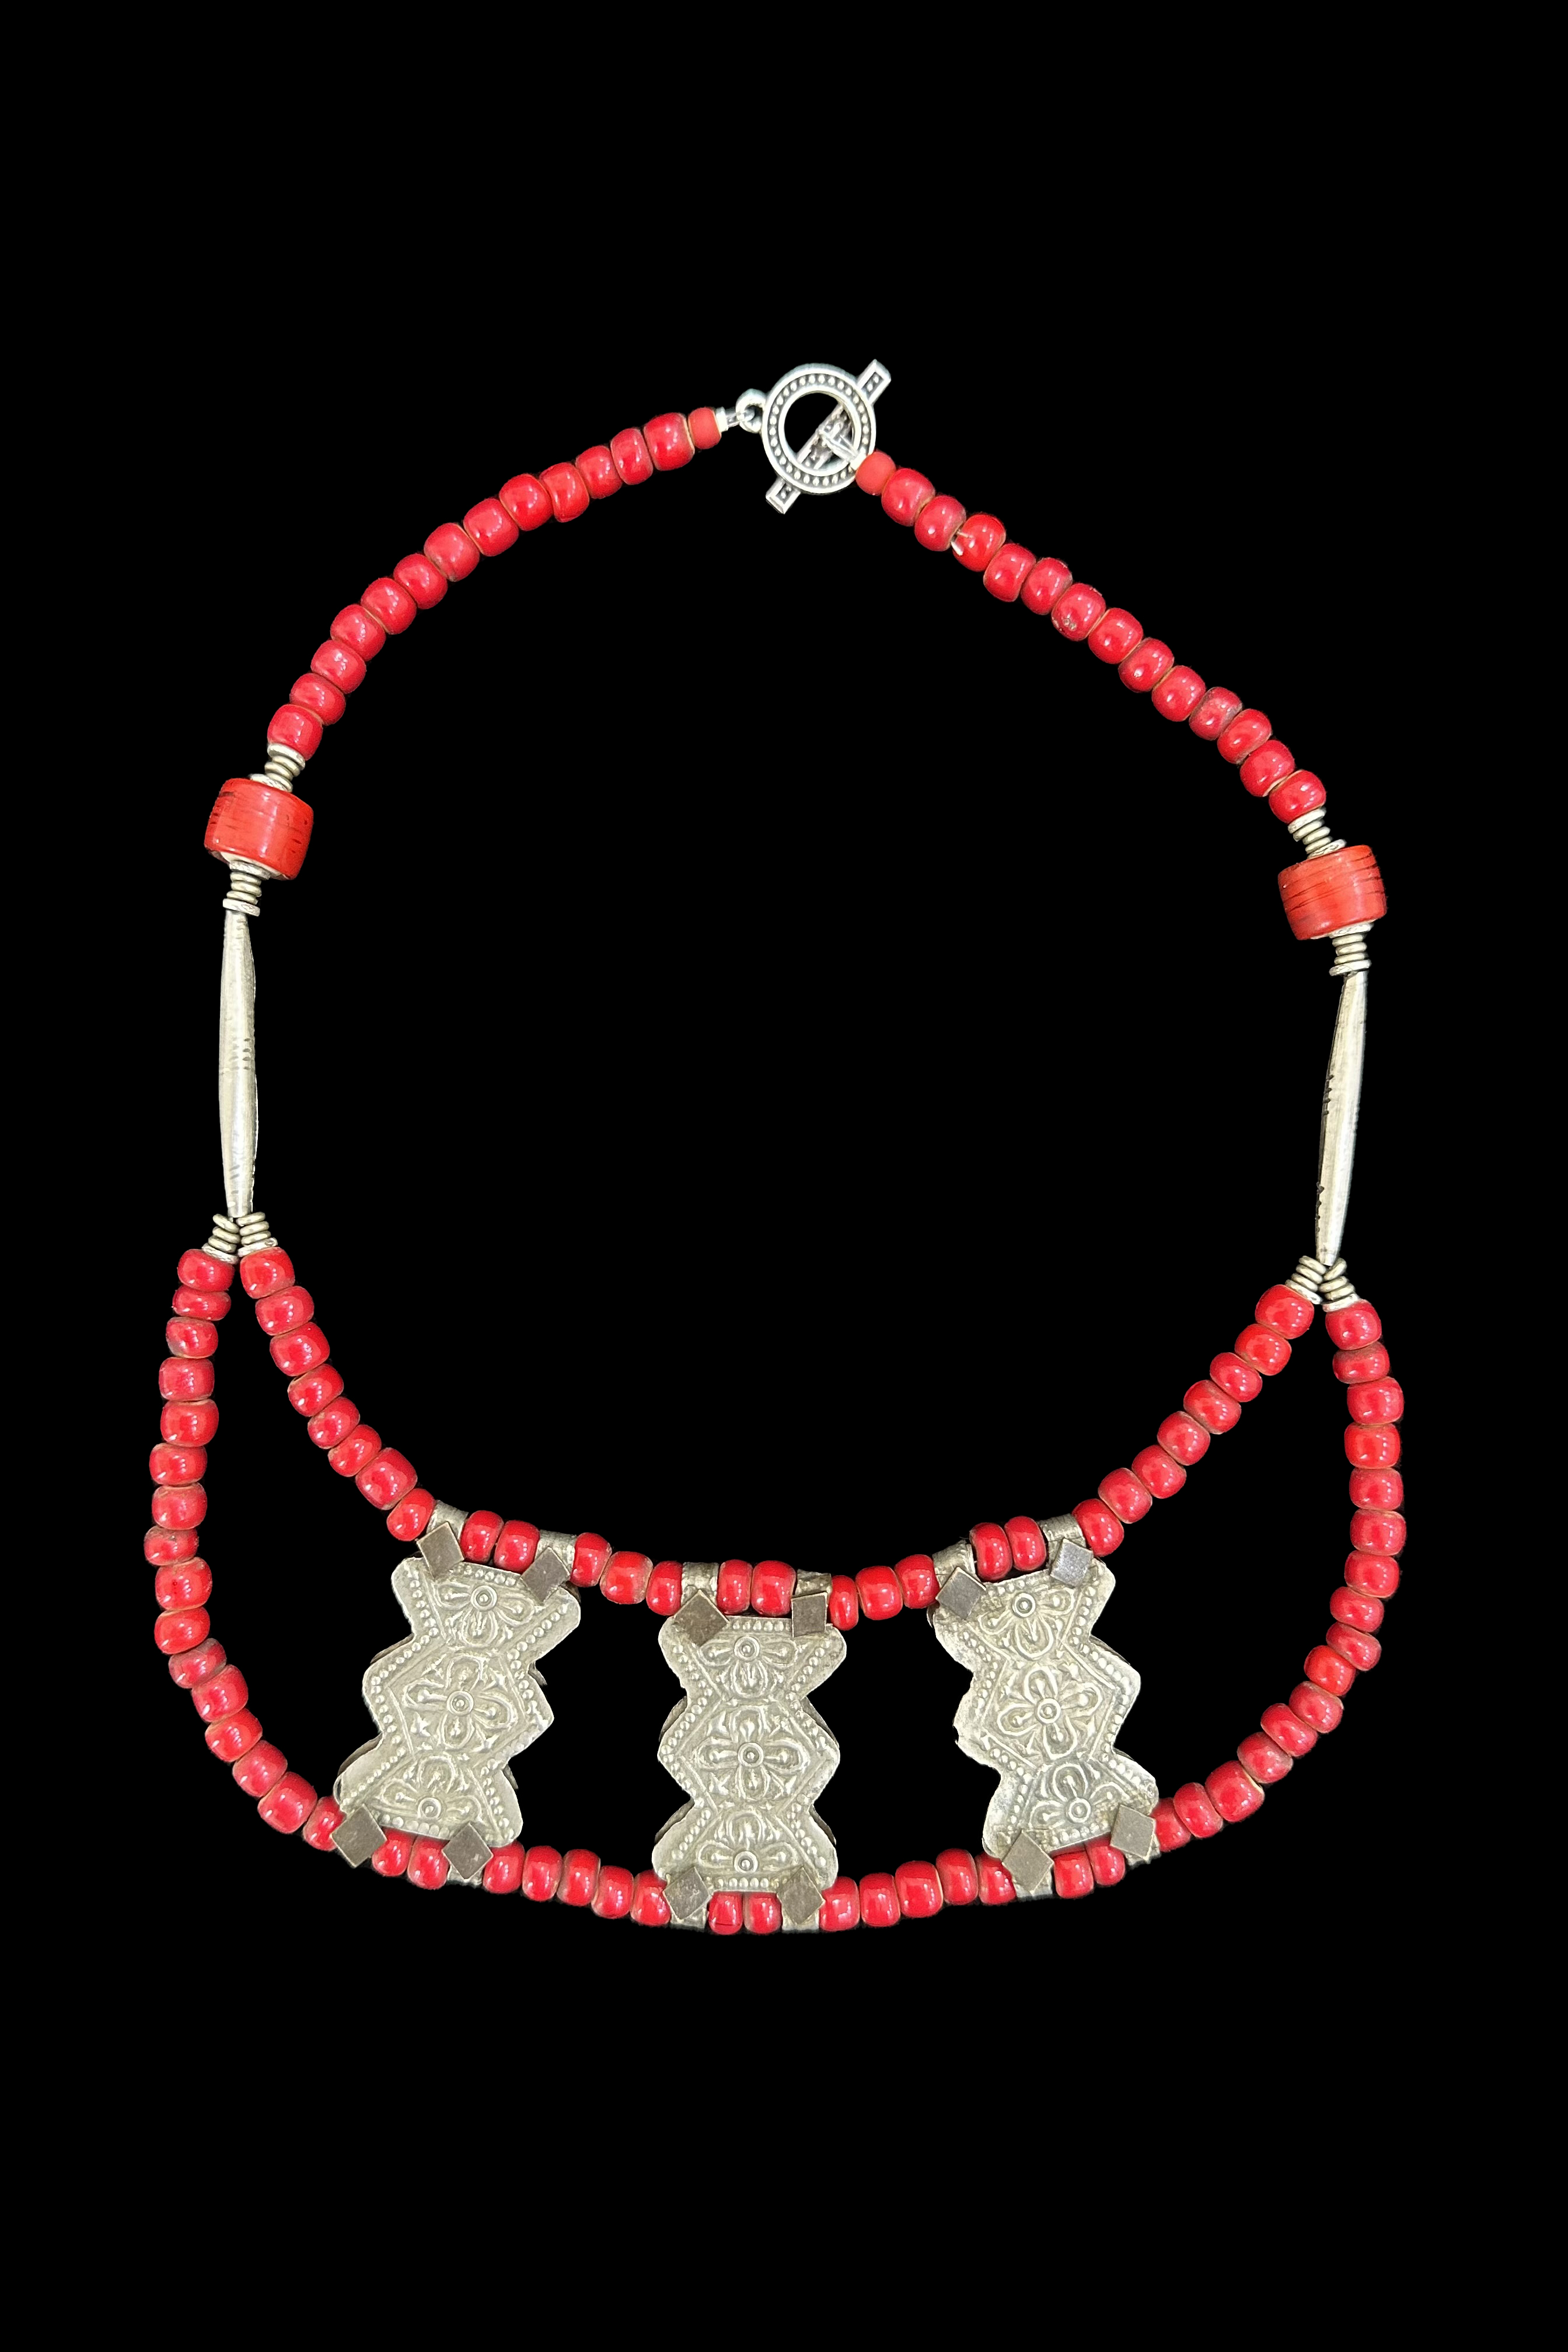 Unique Necklace made with Large White Heart Beads and Turkmen Connectors